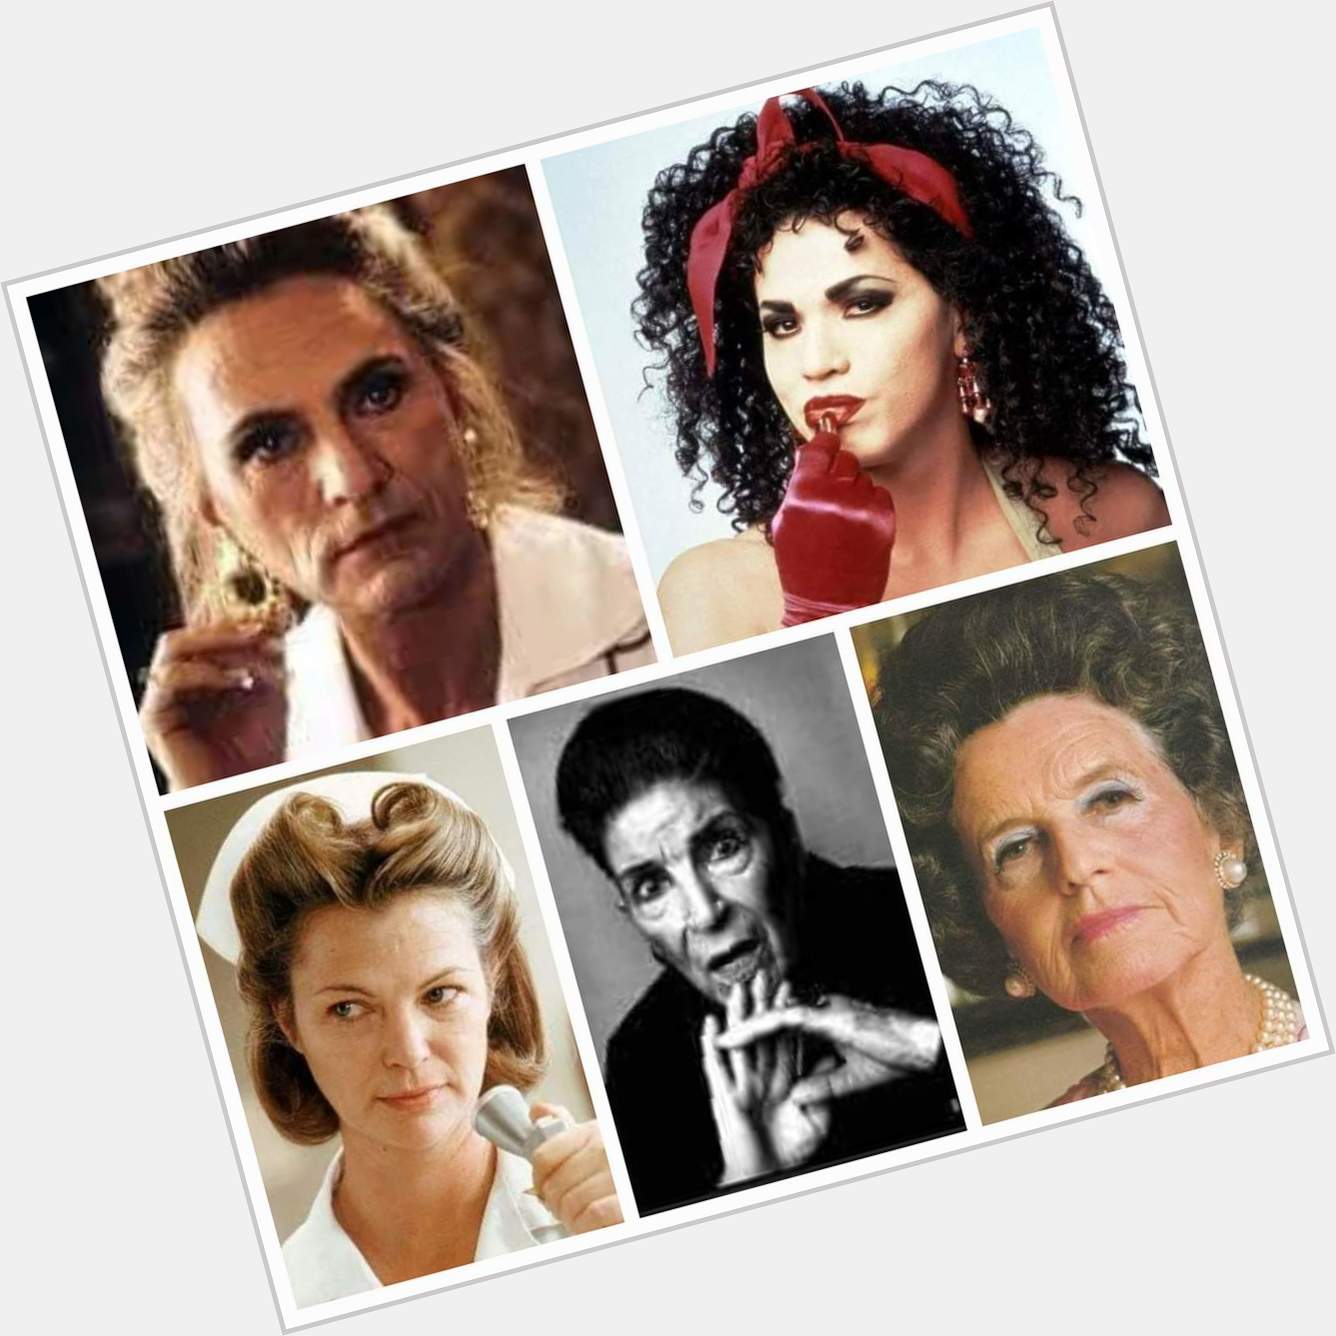 Happy Birthday to Terence Stamp, John Leguizamo, Louise Fletcher, Licia Albanese, and Rose Kennedy! 